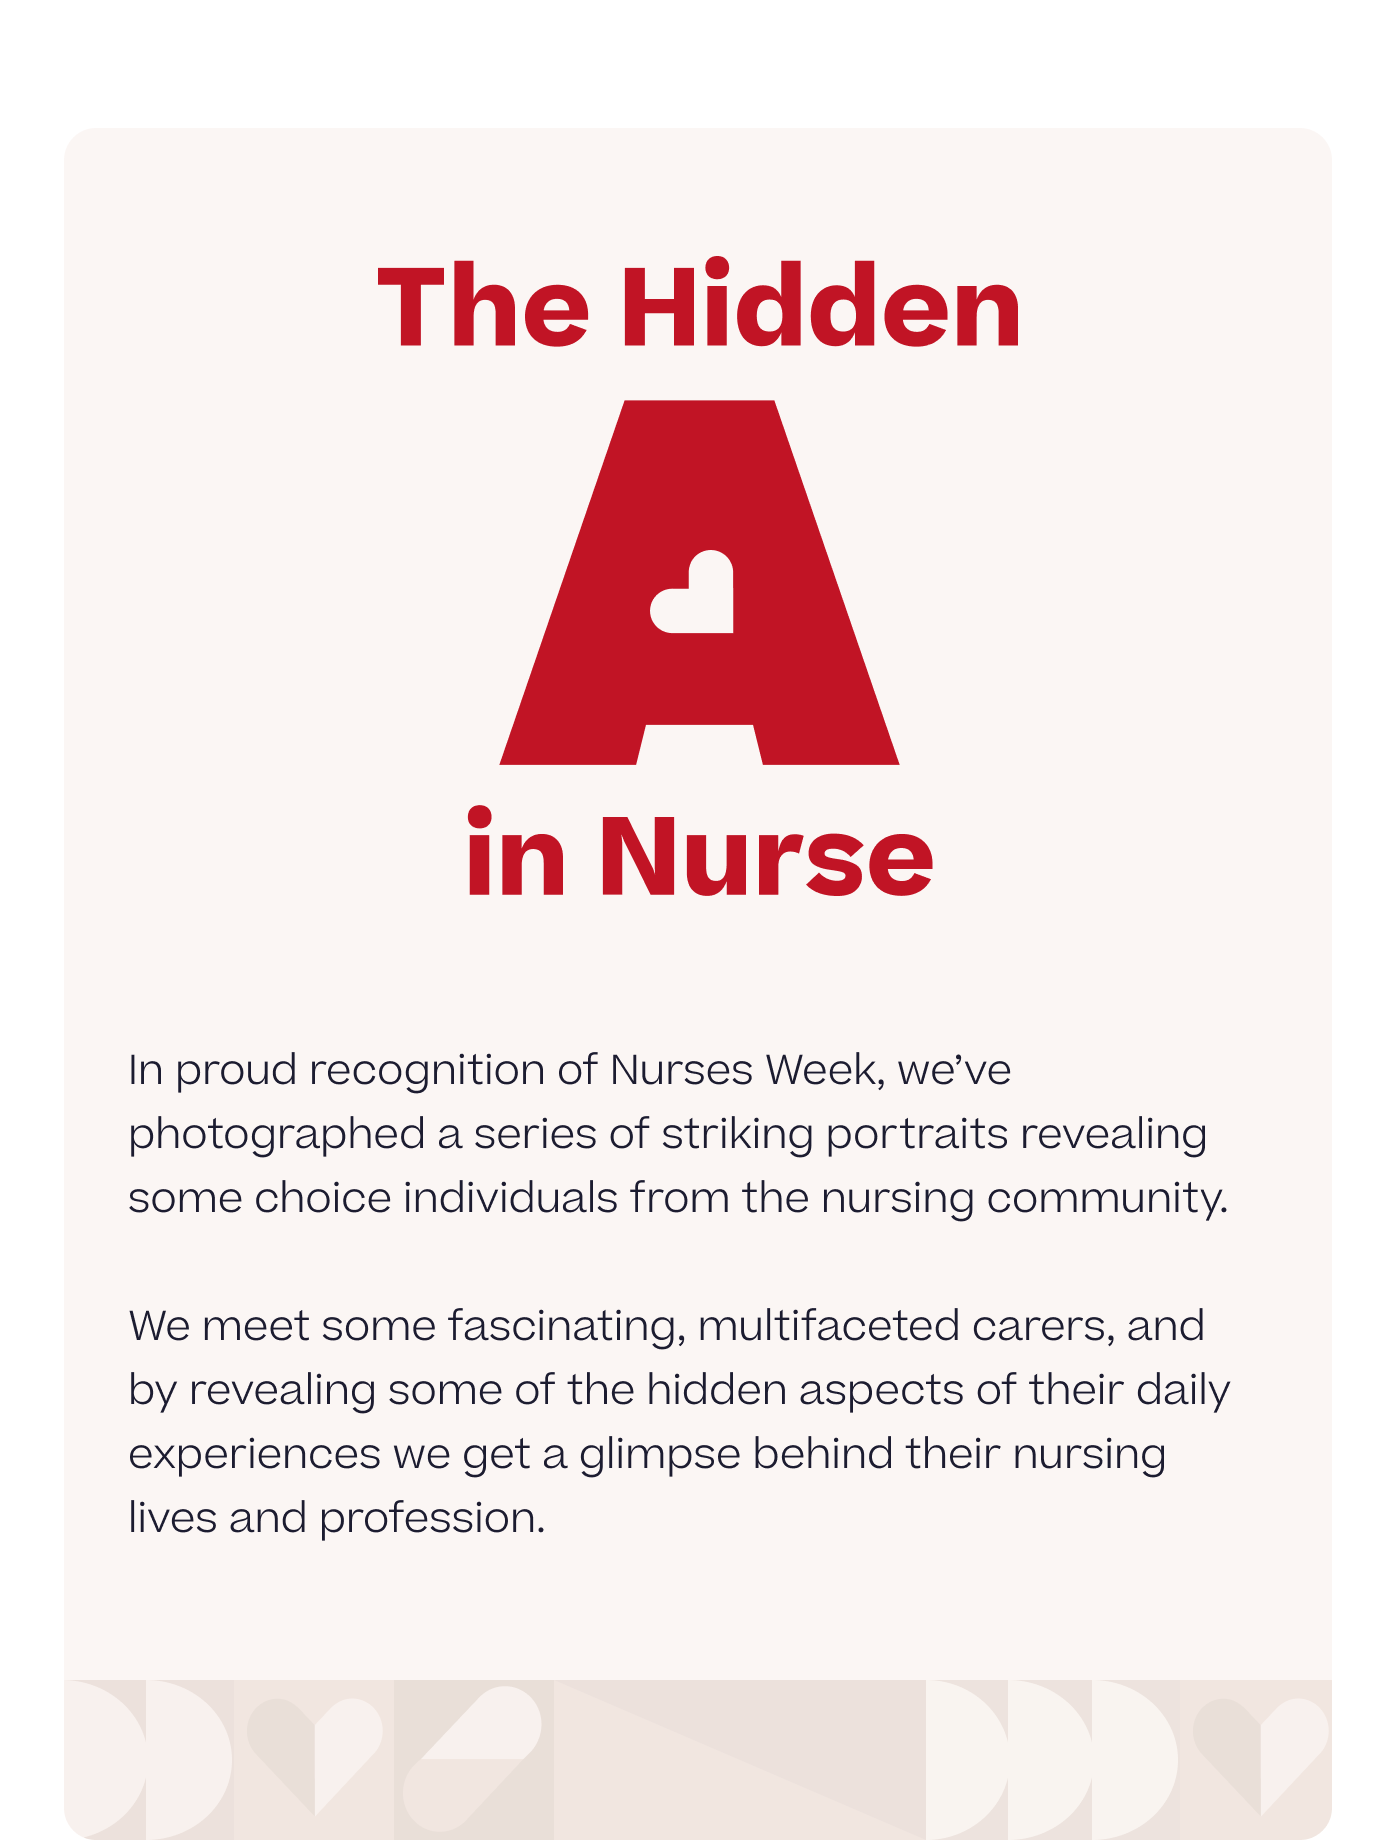 The hidden A in nurse. Get a glimpse at the daily experiences in the nursing lives and profession of some fascinating and multifaceted carers in the nursing community.